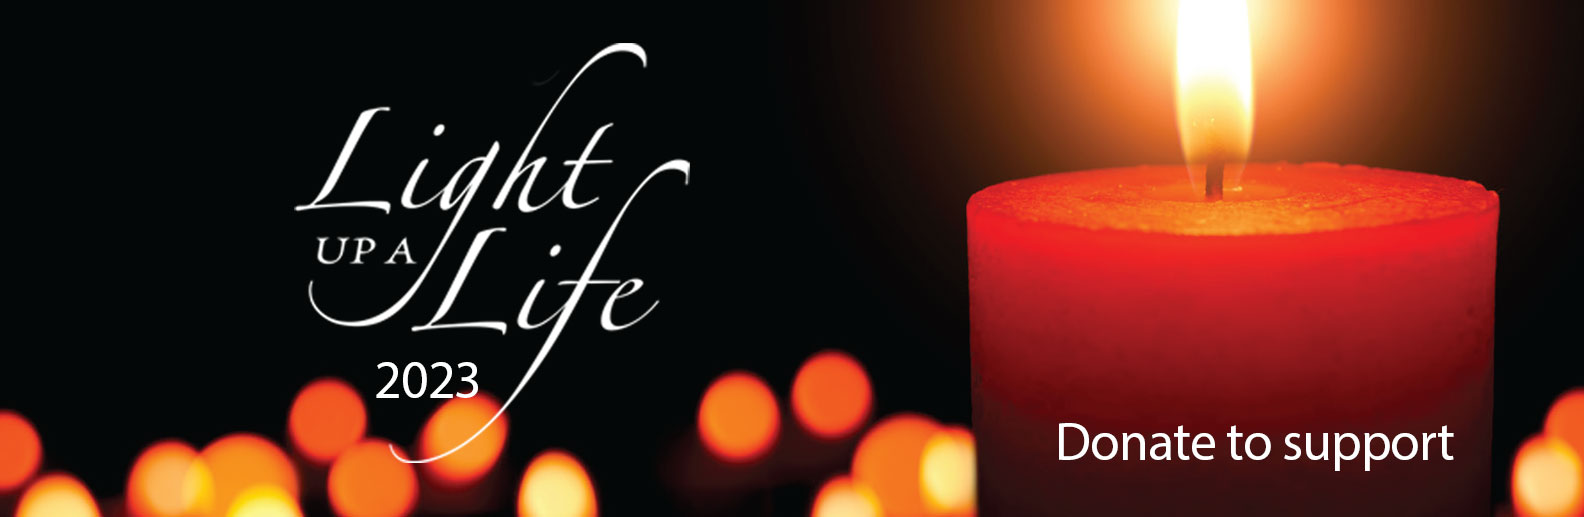 Light Up a Life 2023 - Top Banner with photo of a burning candle and title